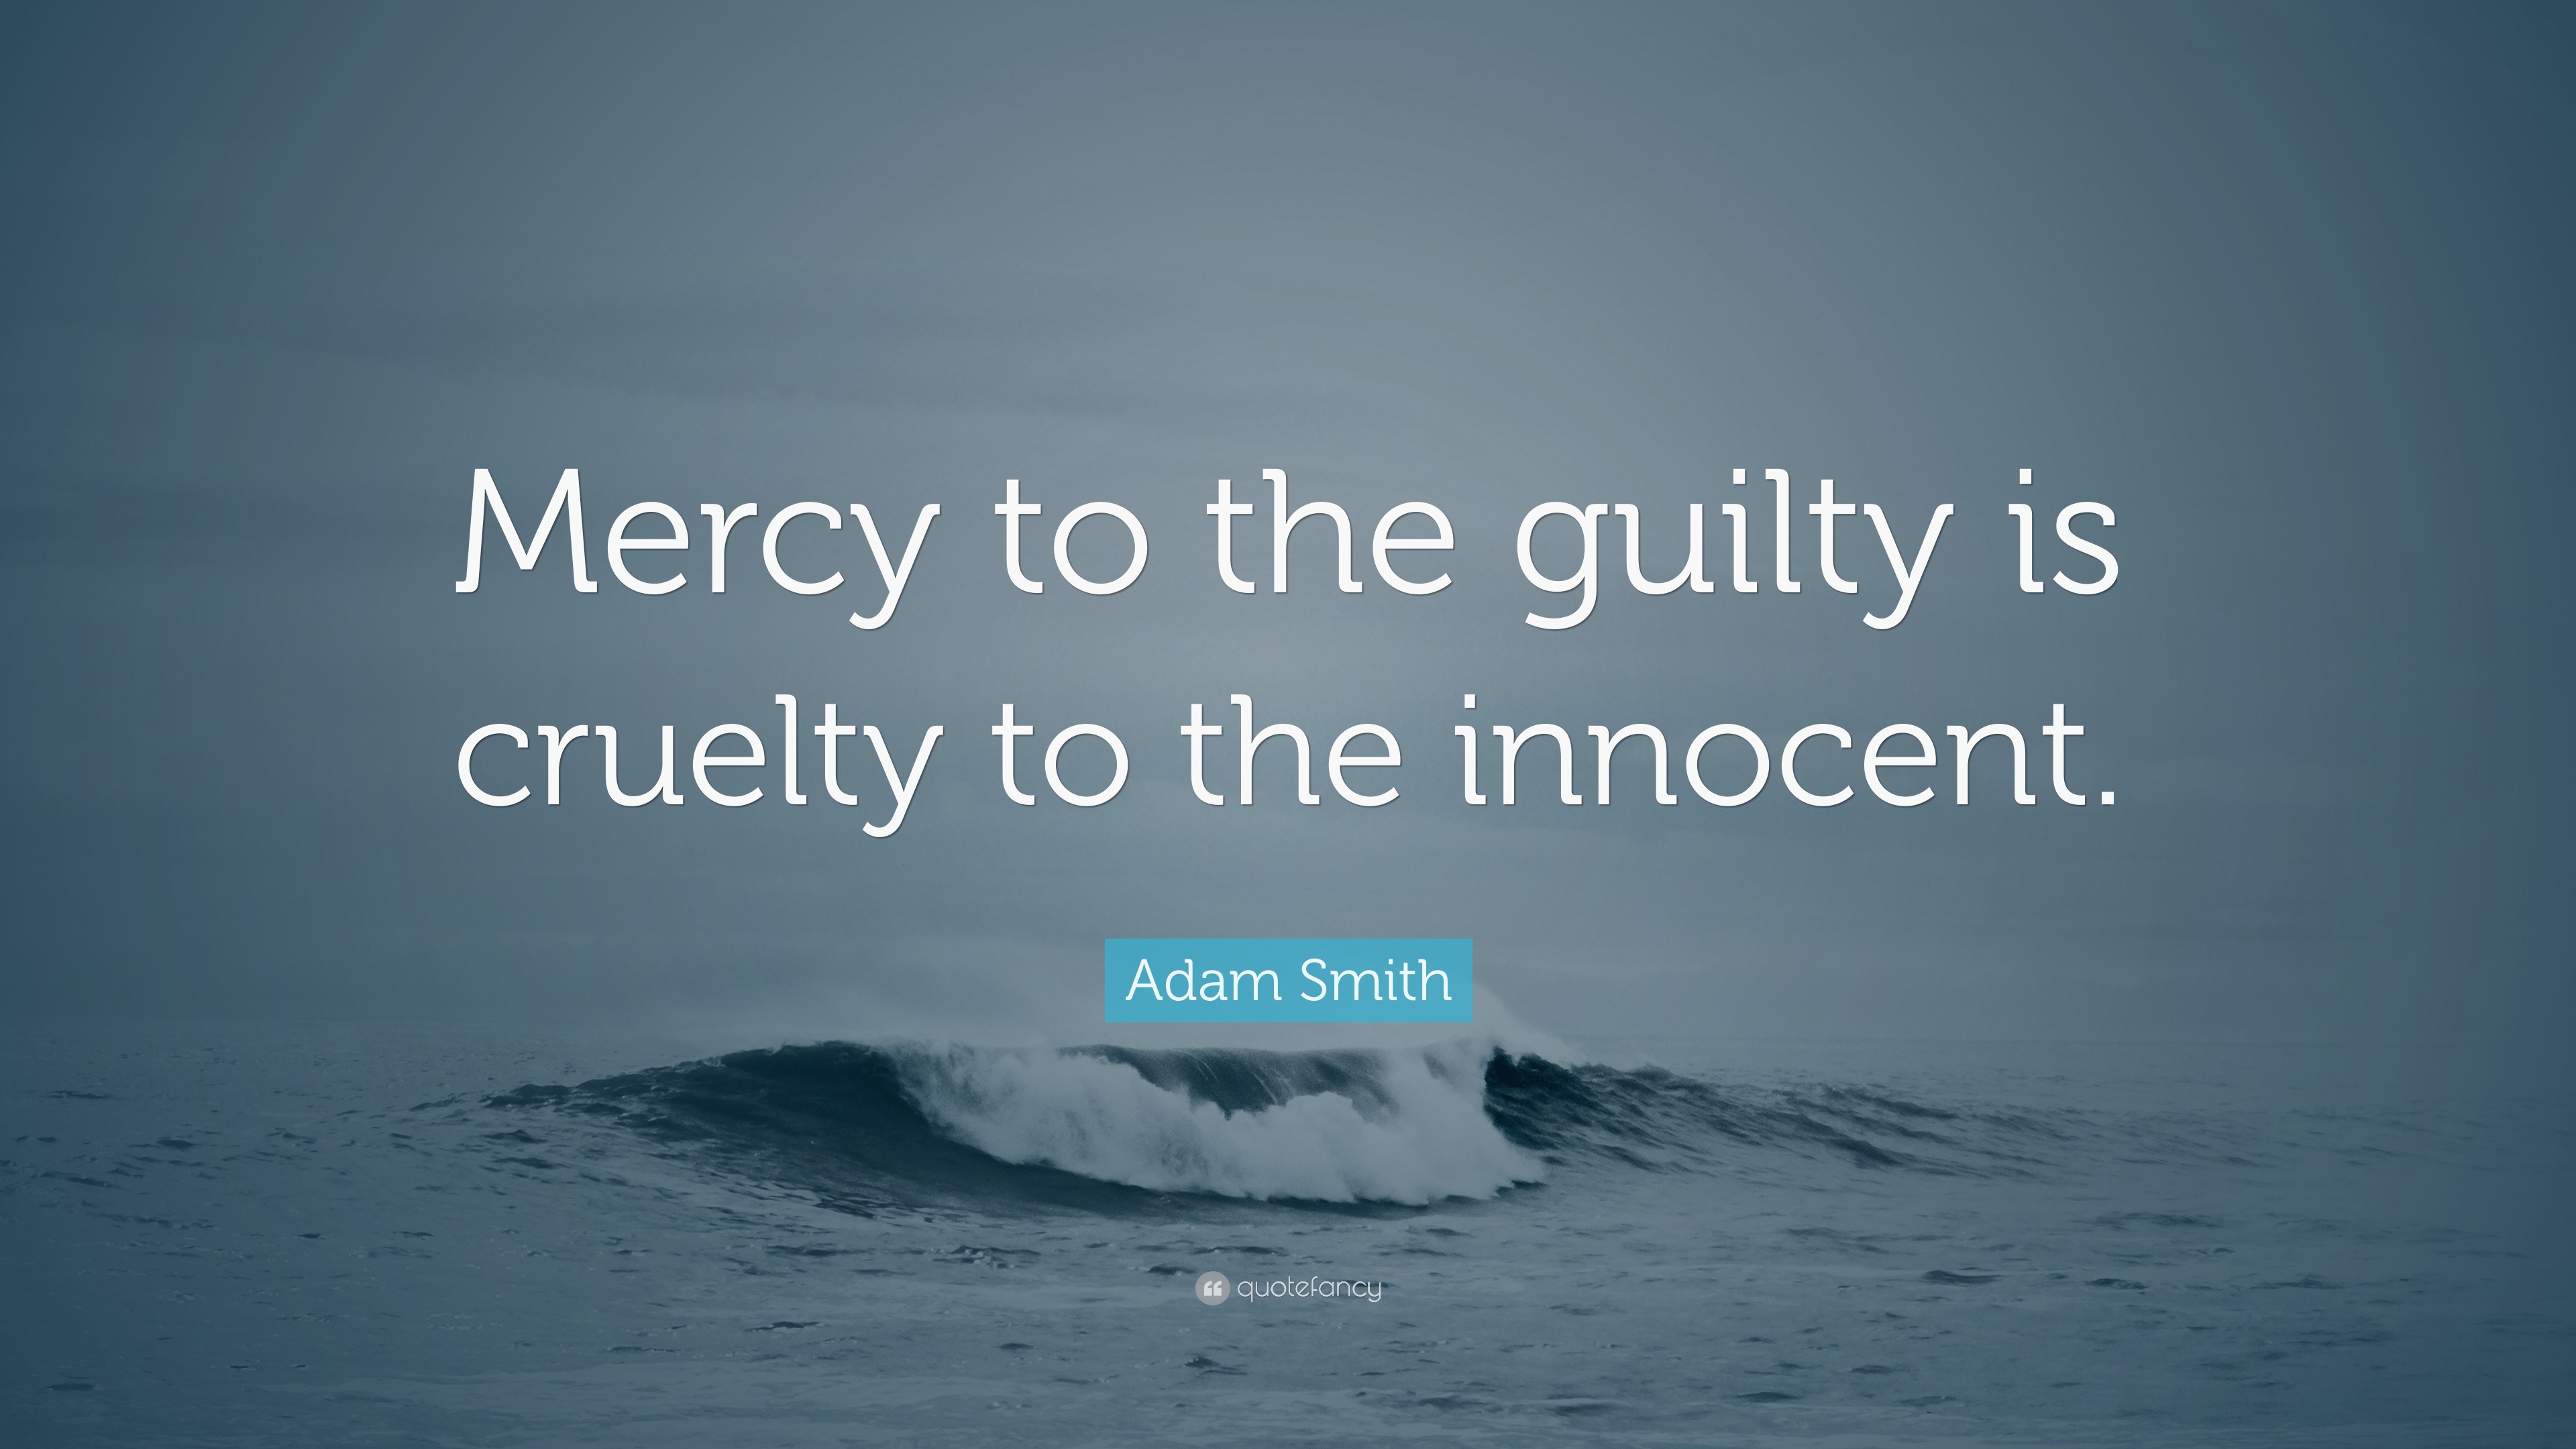 Adam Smith Quote: “Mercy to the guilty is cruelty to the innocent.”